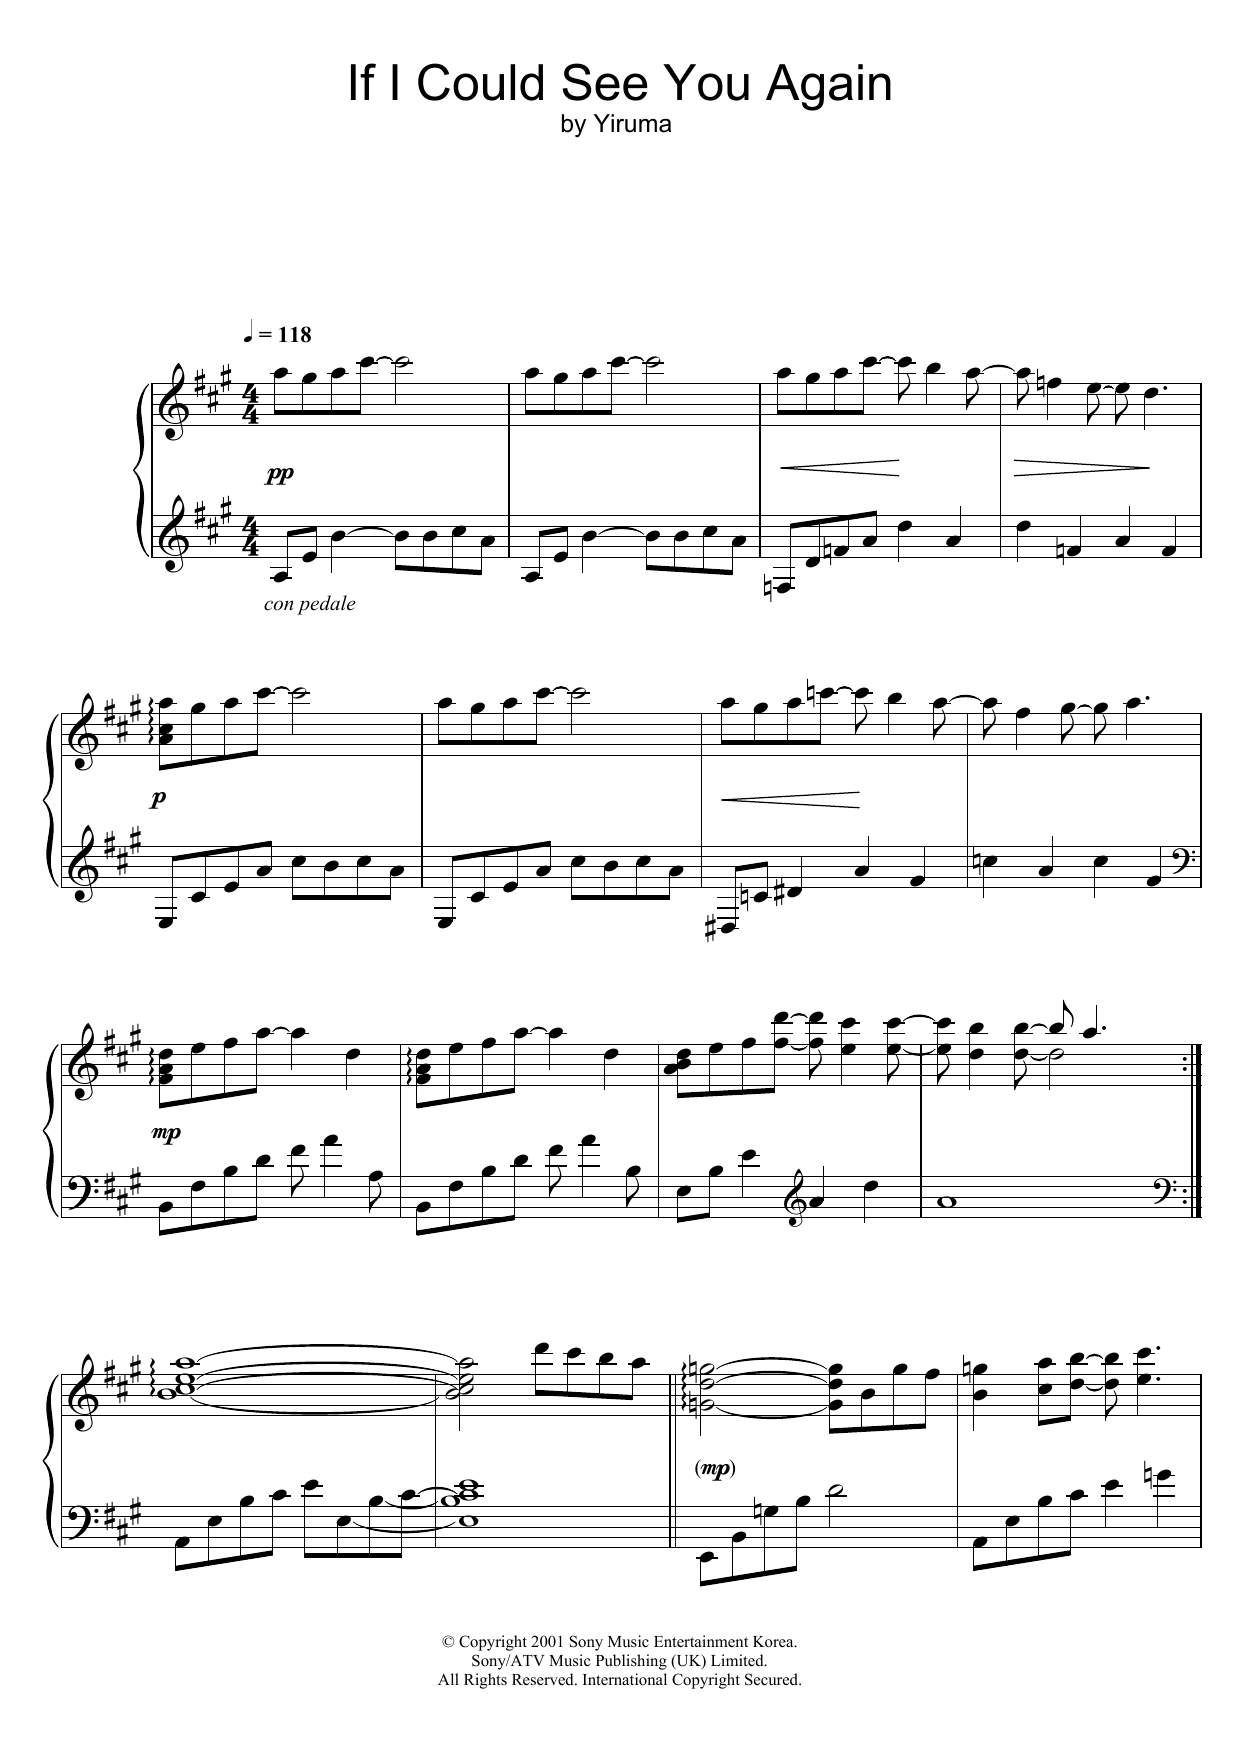 Download Yiruma If I Could See You Again Sheet Music